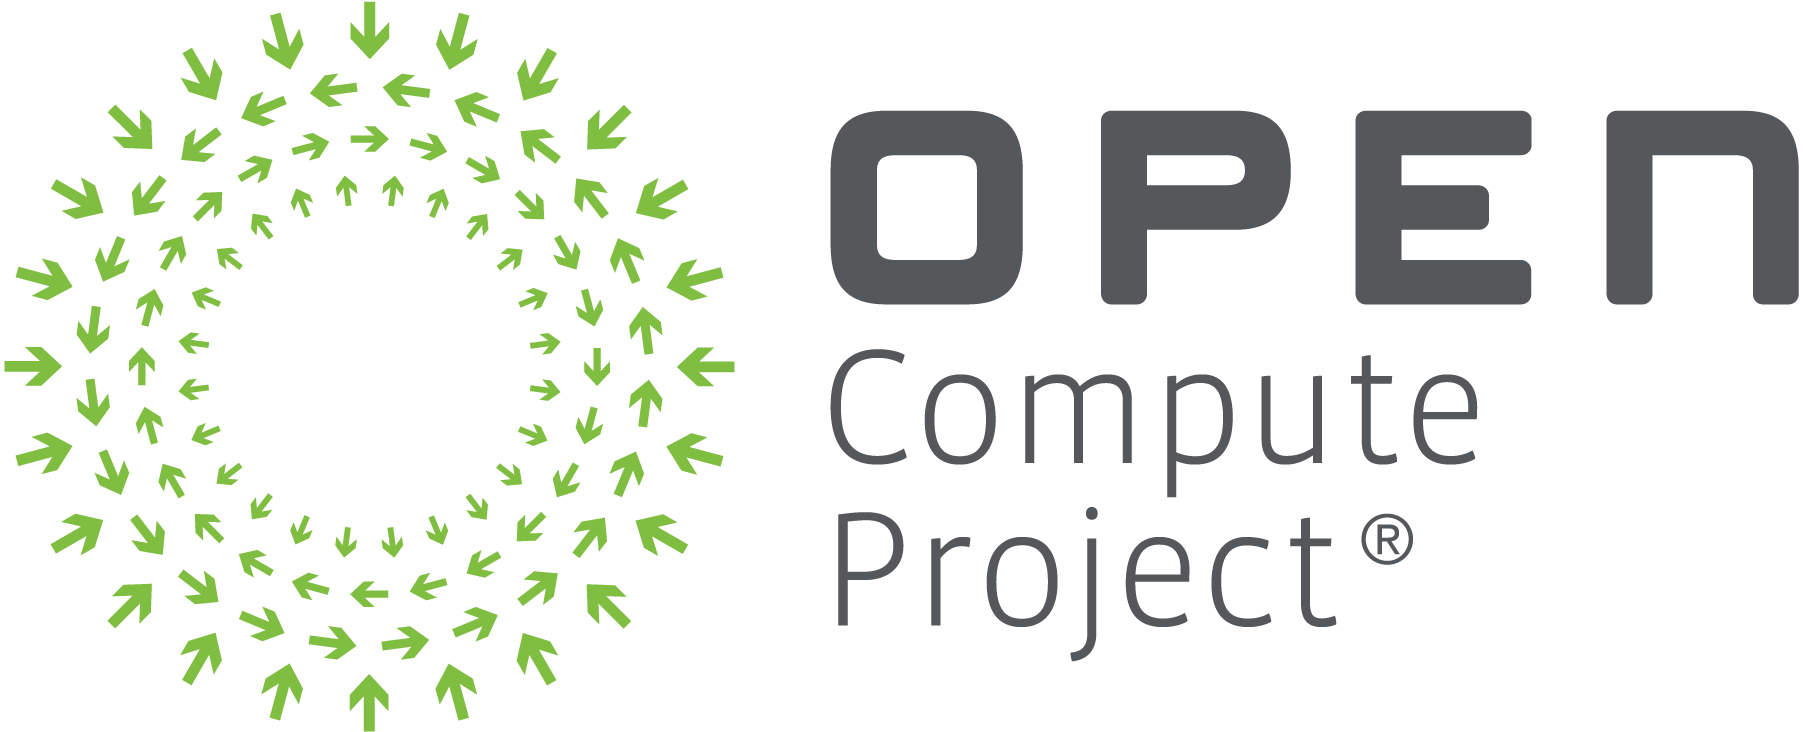 Open Compute Project